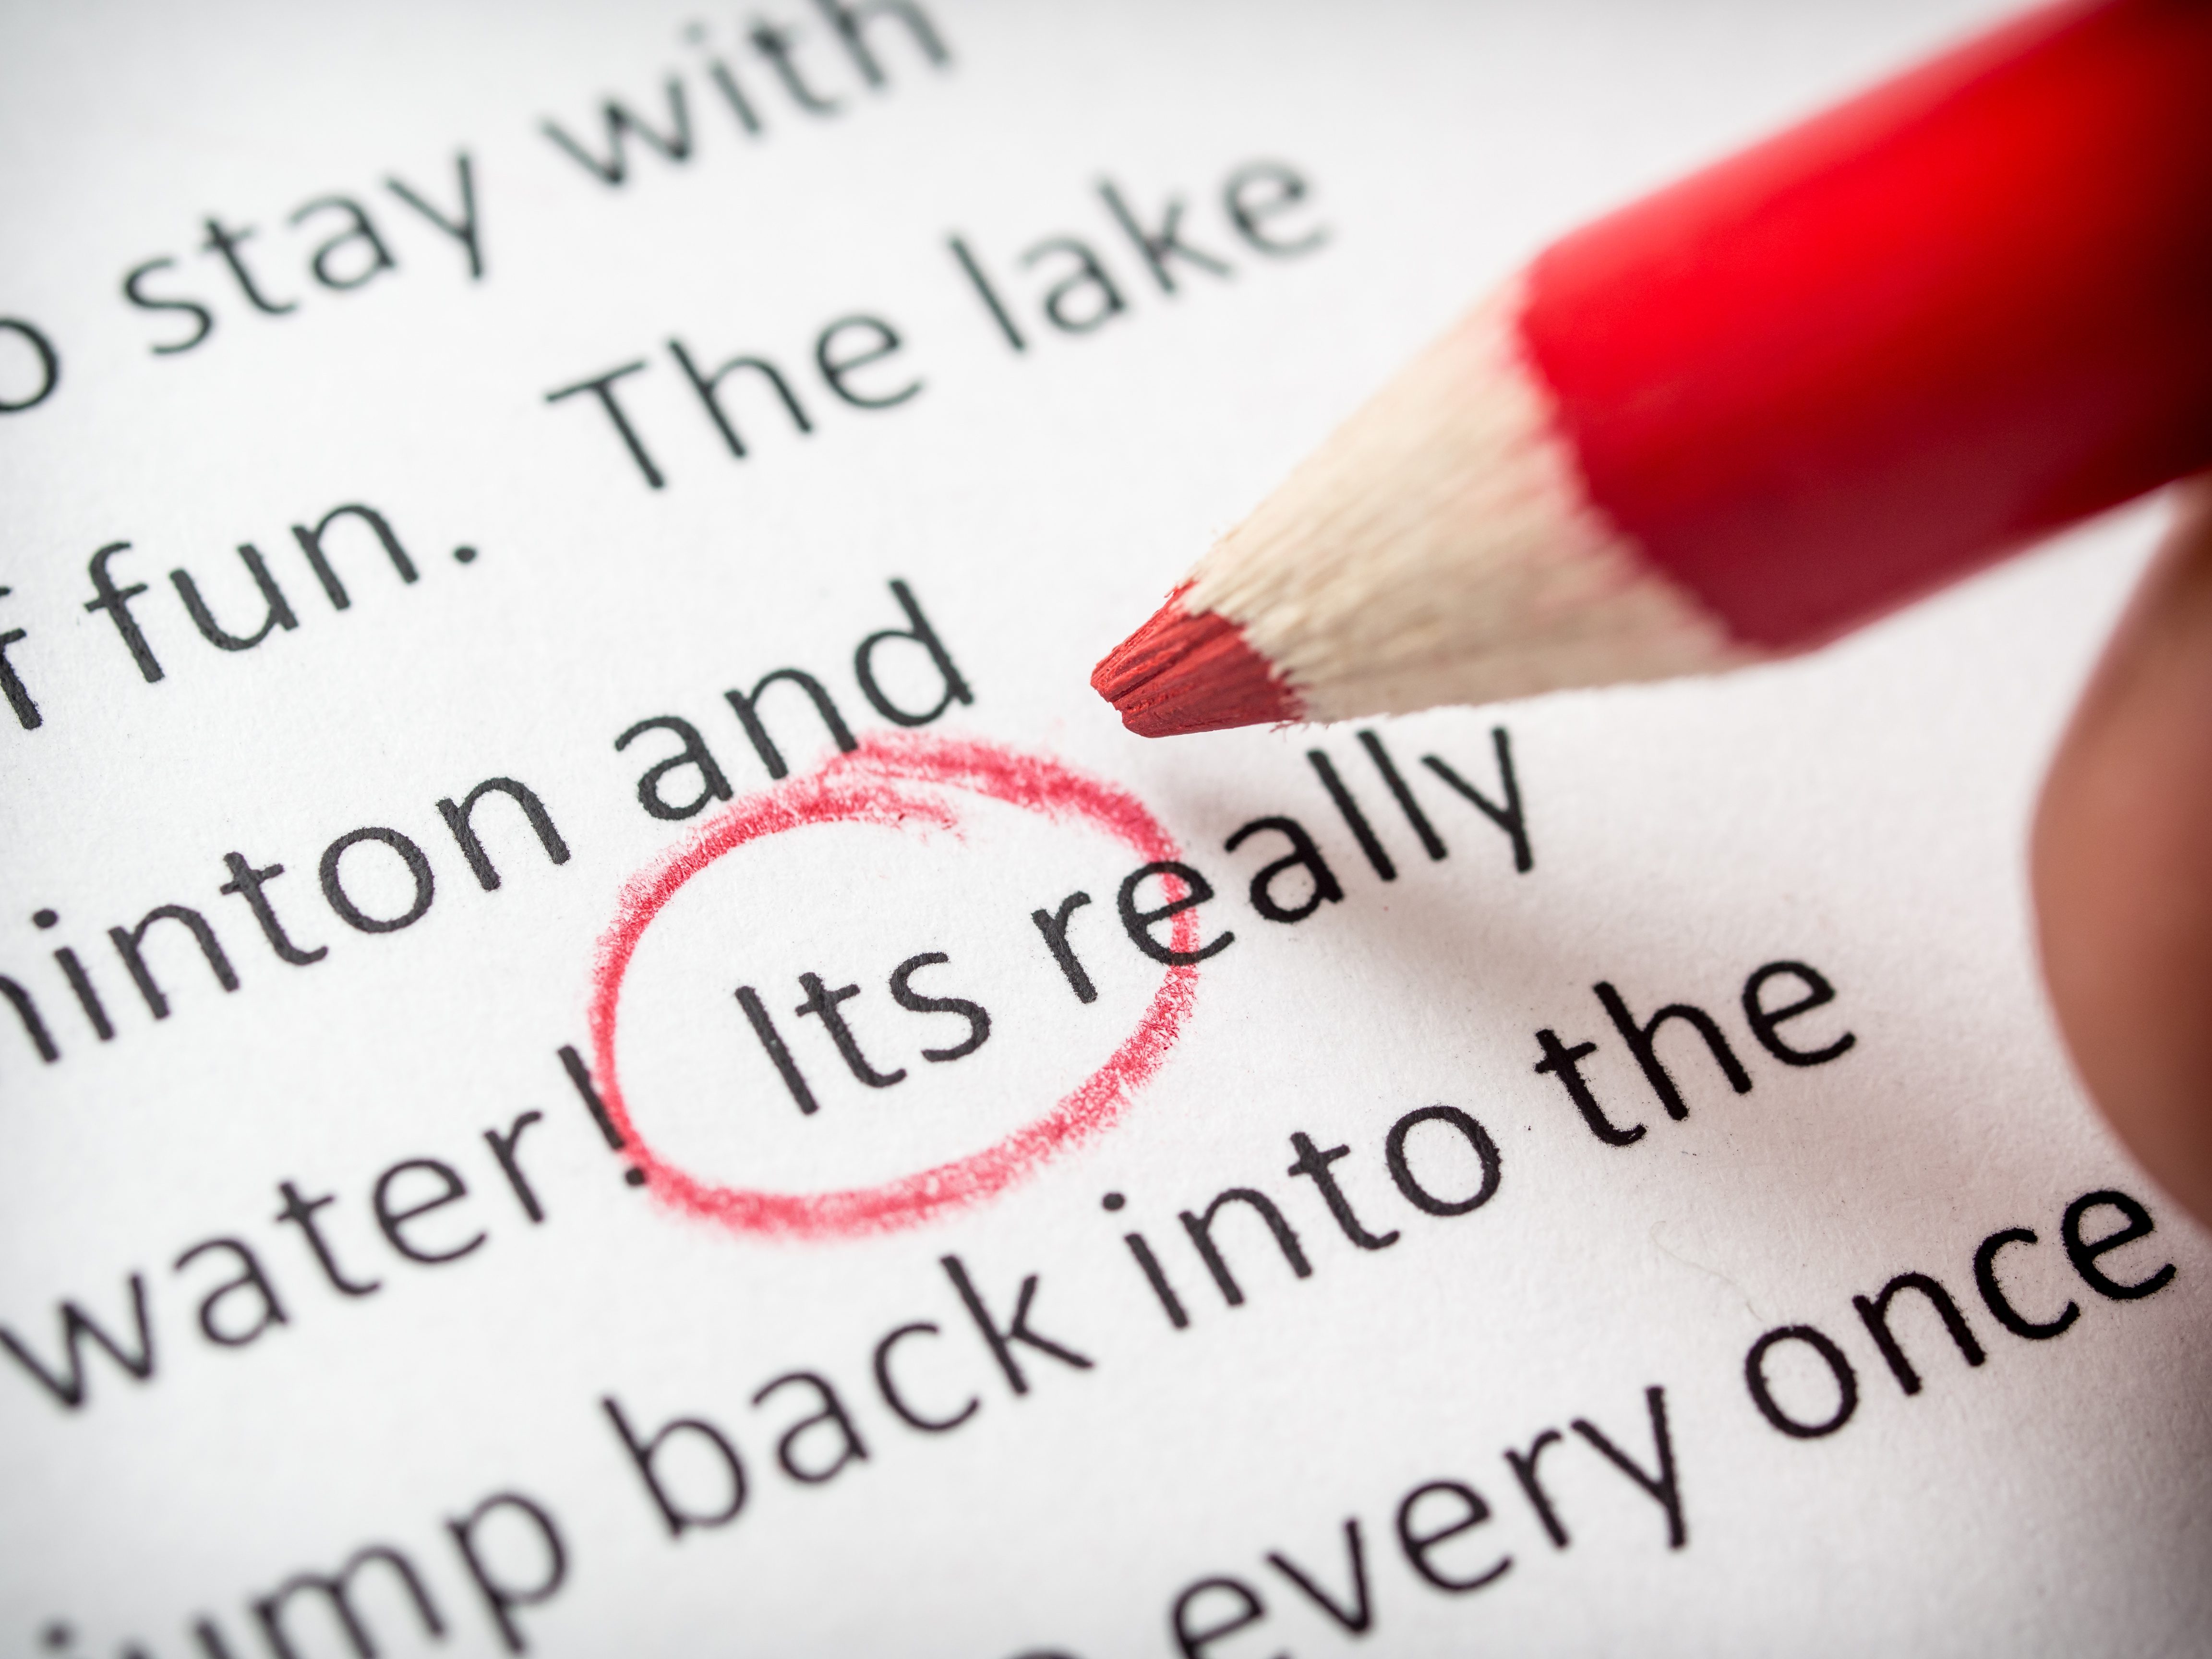 proofreading online check